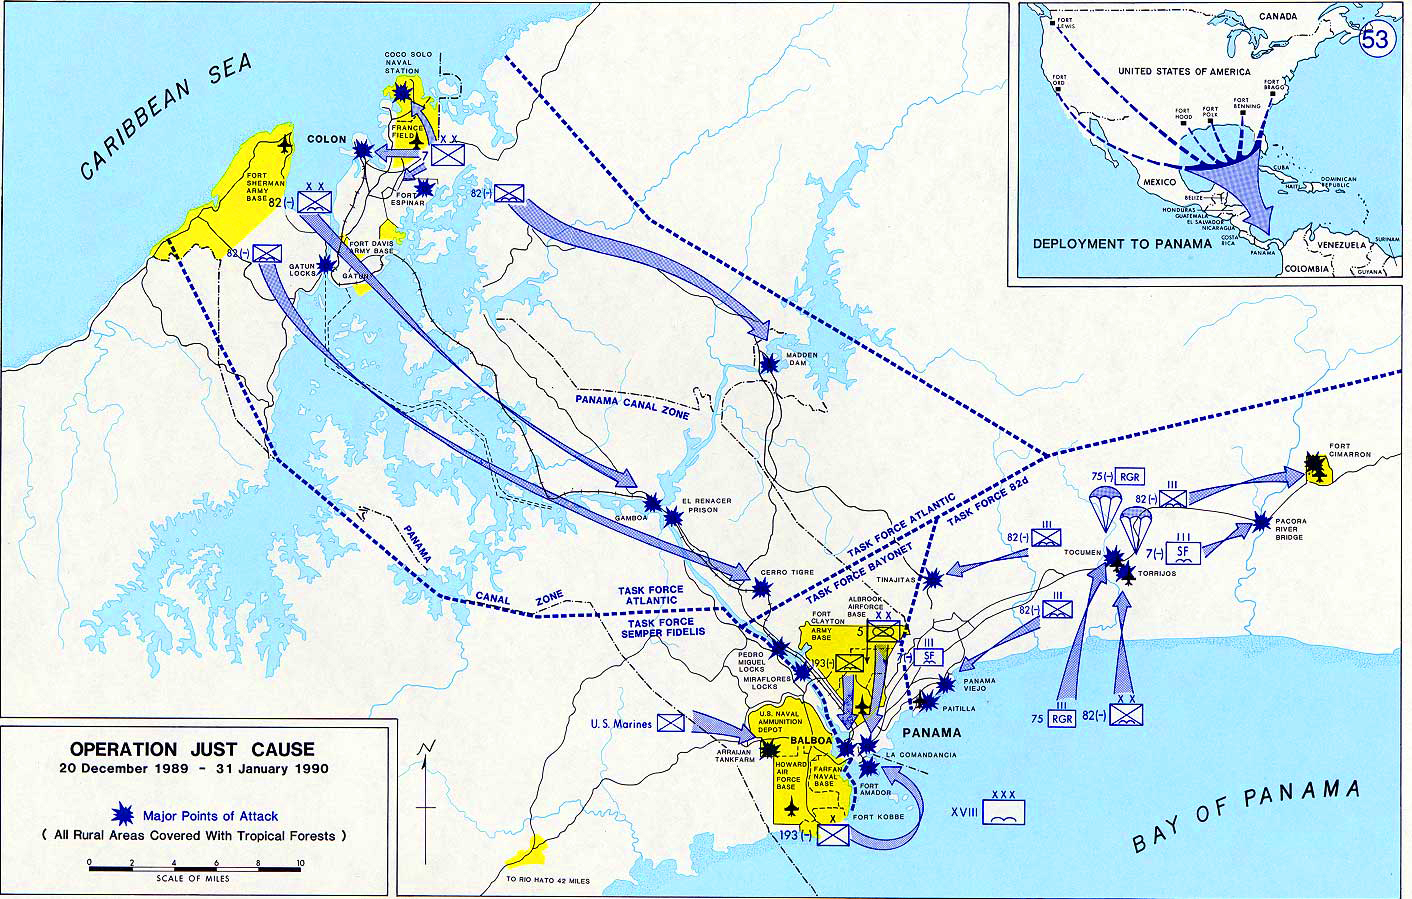 History Map of Panama 1990. Operation JUST CAUSE, December, 20, 1989 - January 31, 1990.